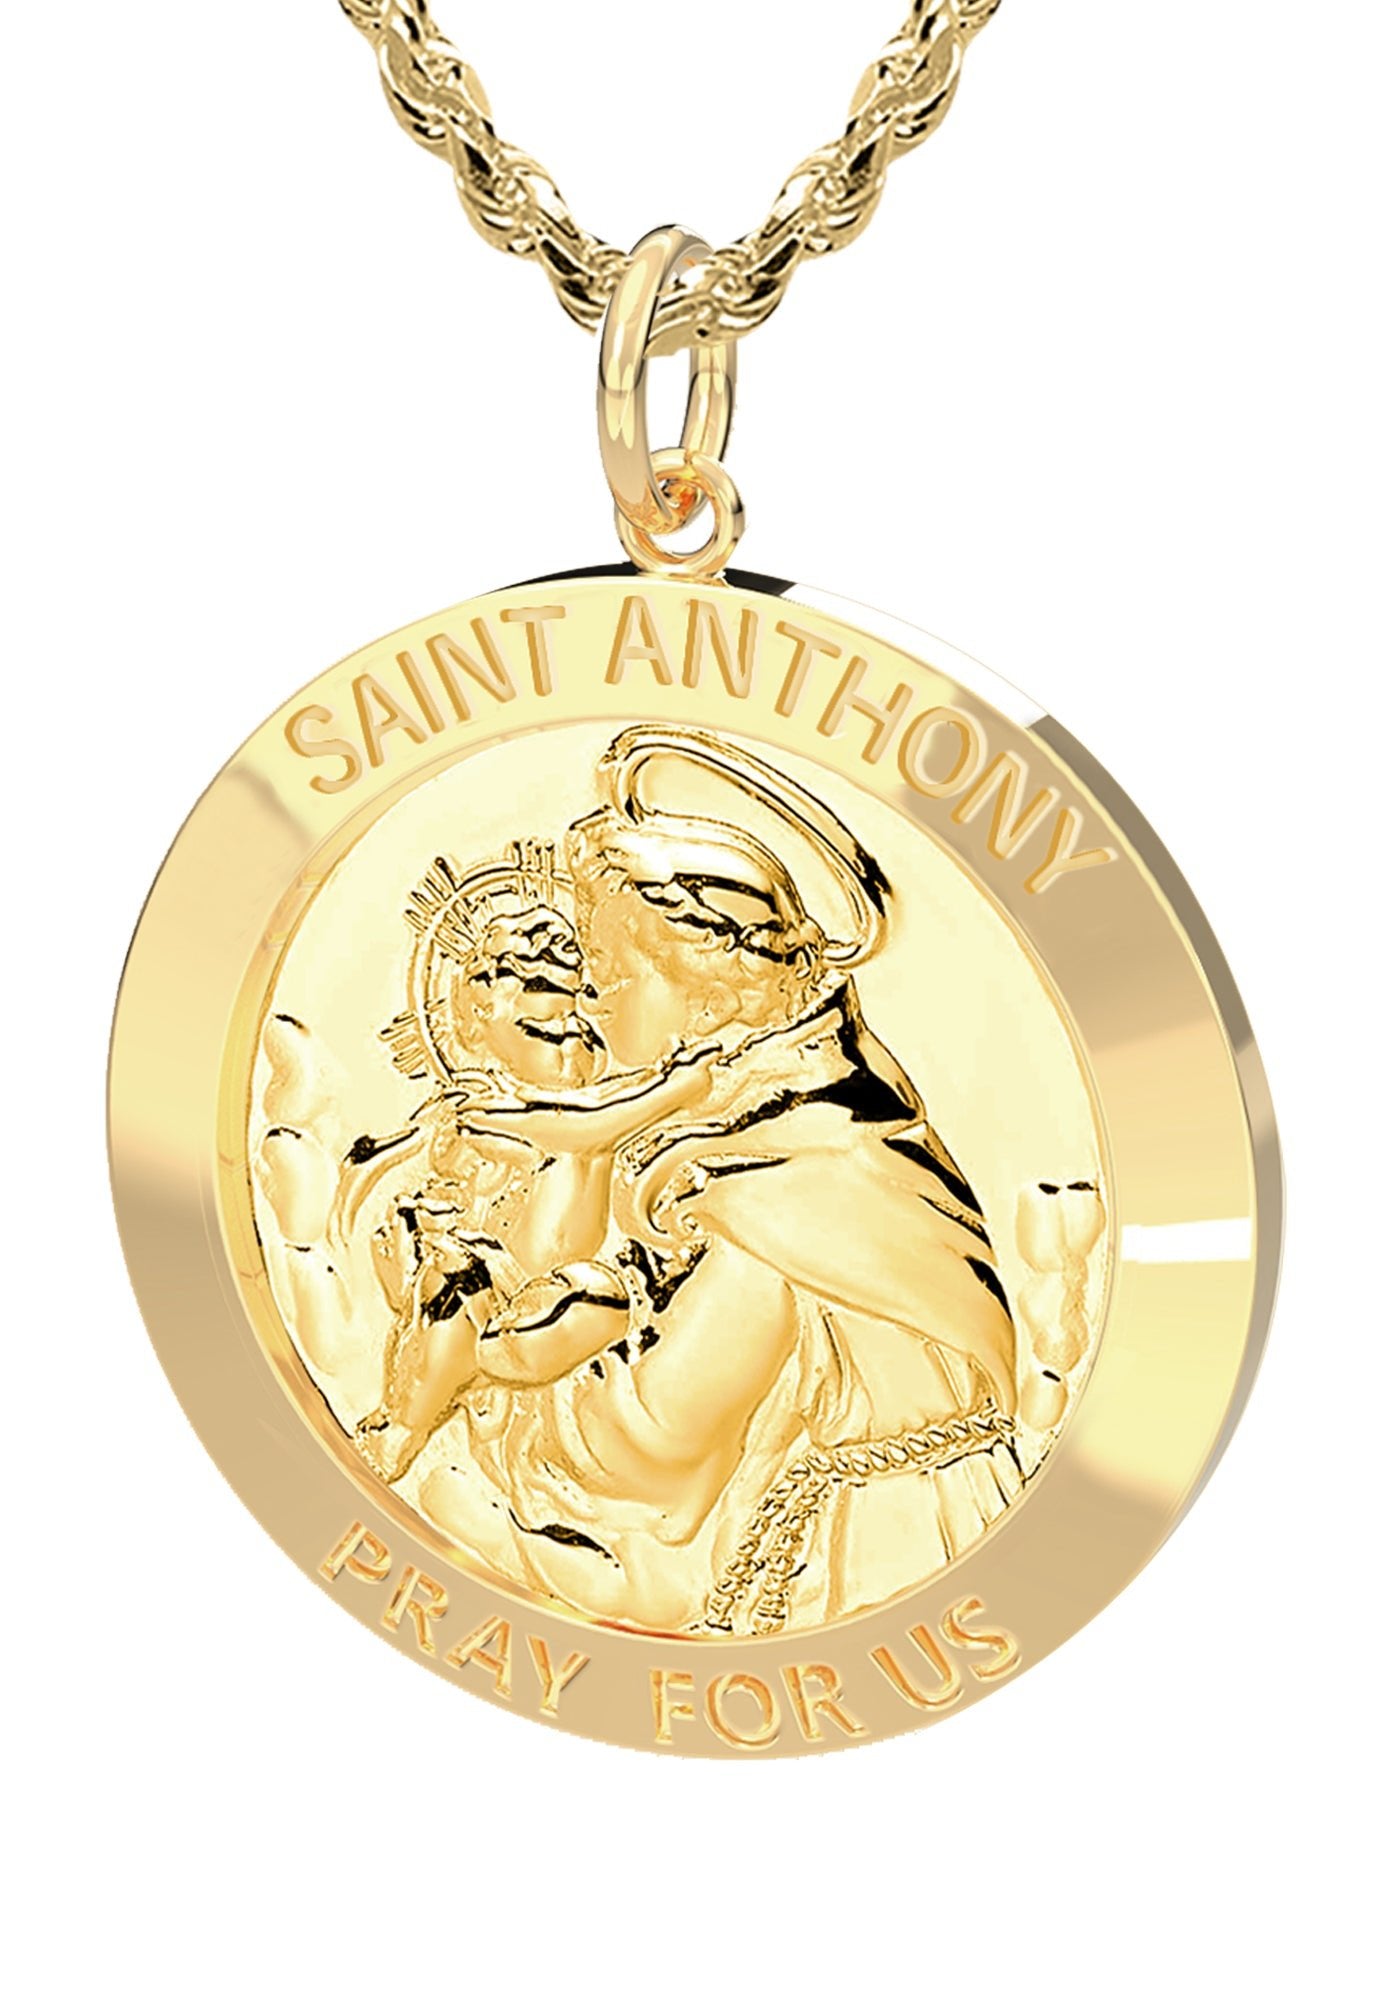 Ladies 14K Yellow Gold Solid Saint Anthony Medal Pendant Necklace, 22mm - US Jewels